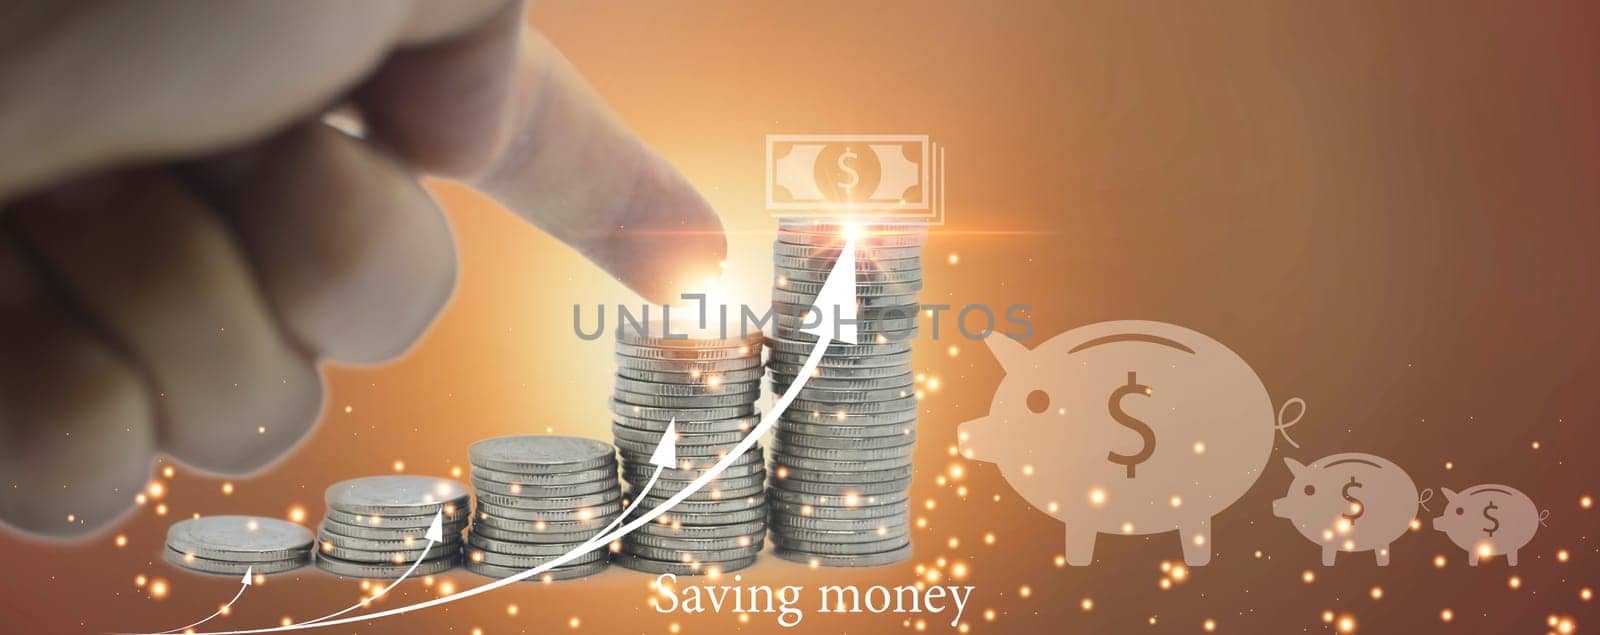 money saving concept for the future, financial planning